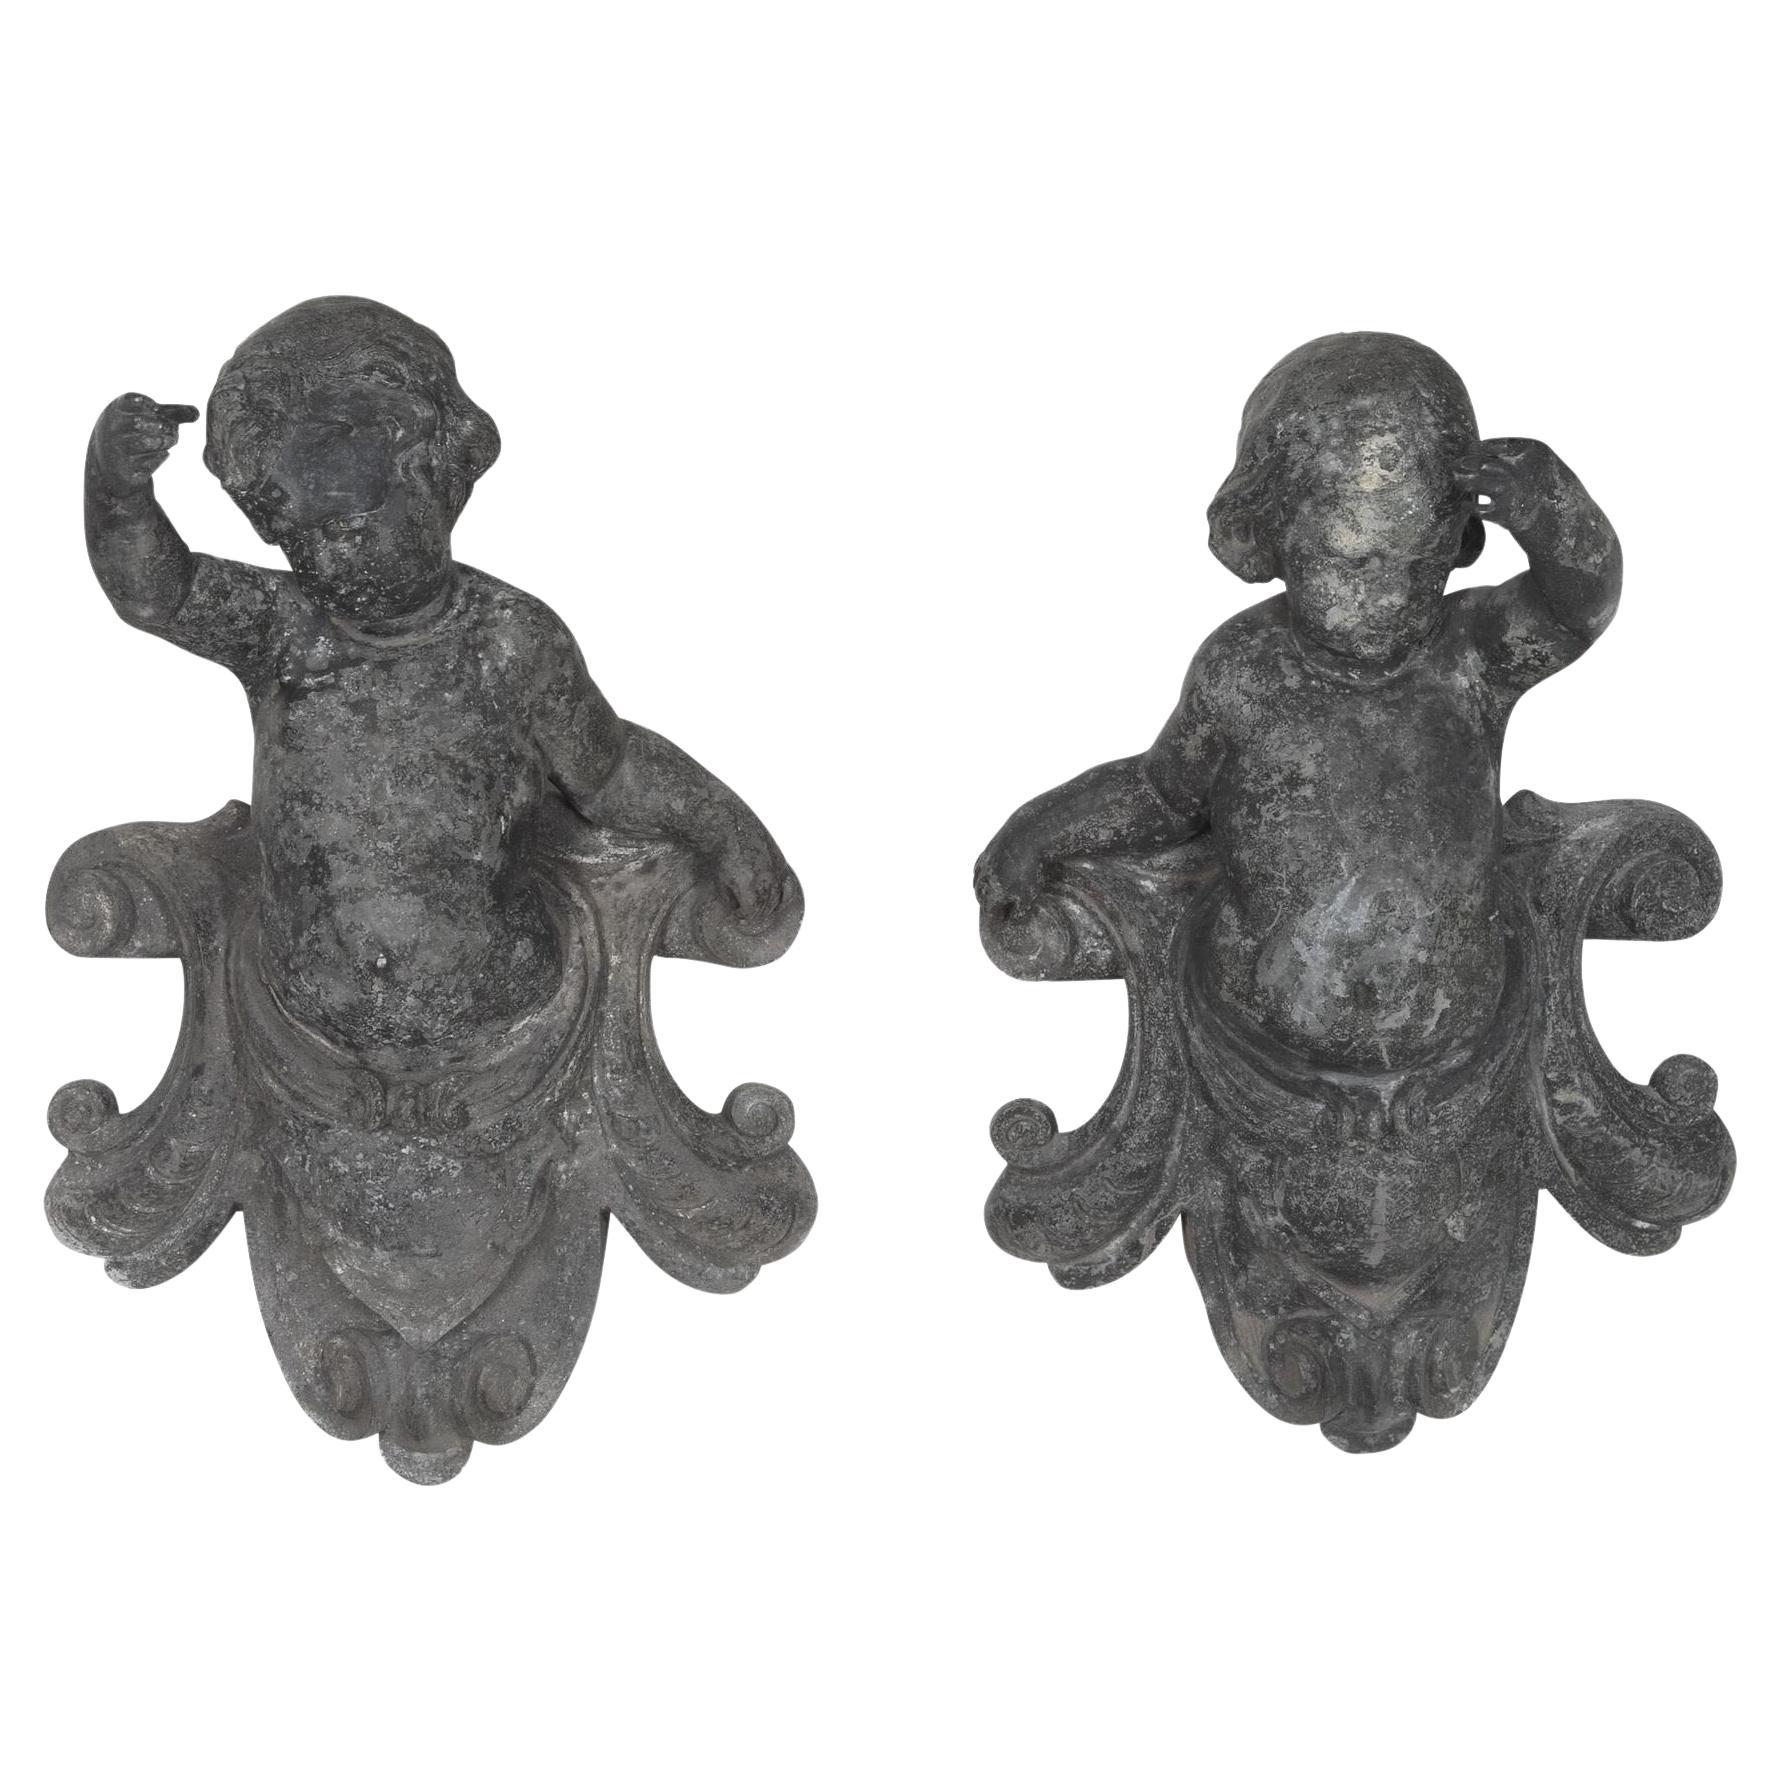 Pair of 19th Century French Cast Alloy Putti Figures